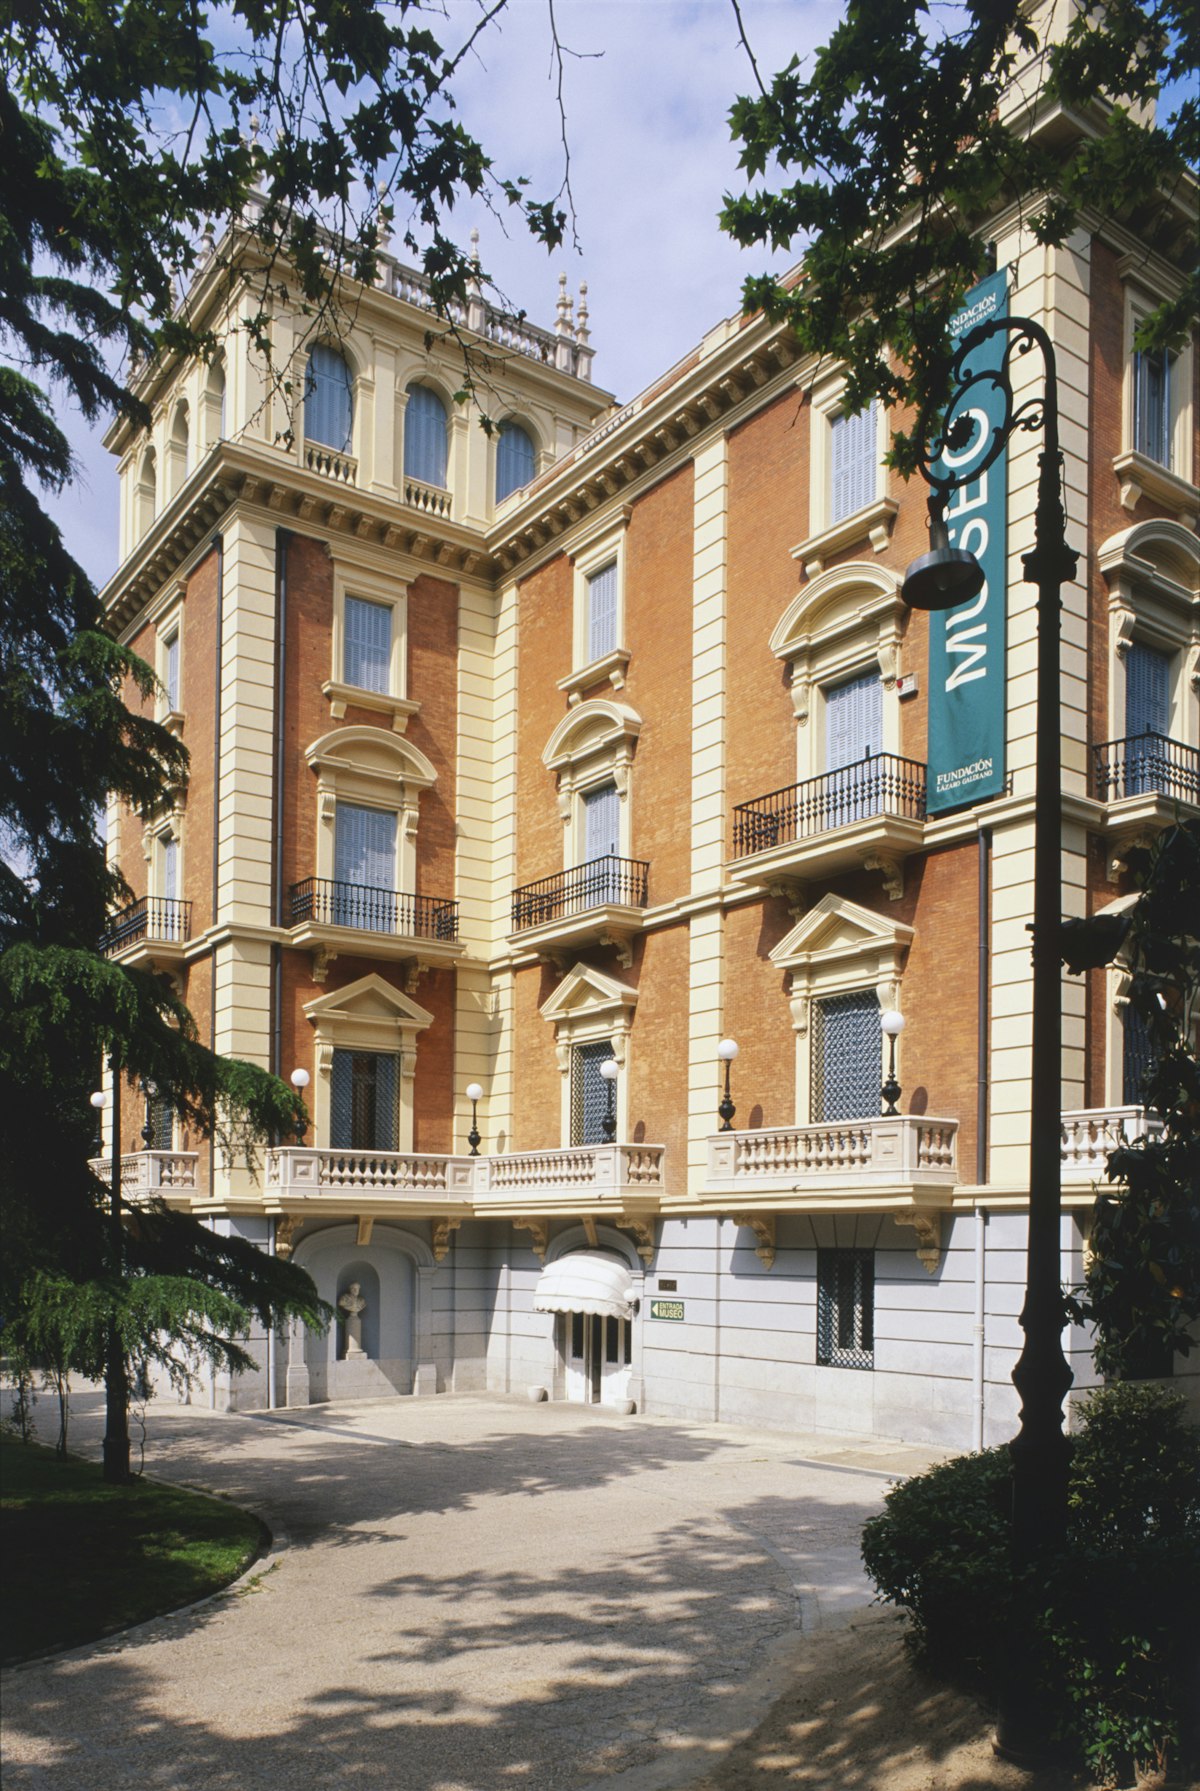 Spain, Madrid, part of the exterior of the Museo Lazaro Galdiano.